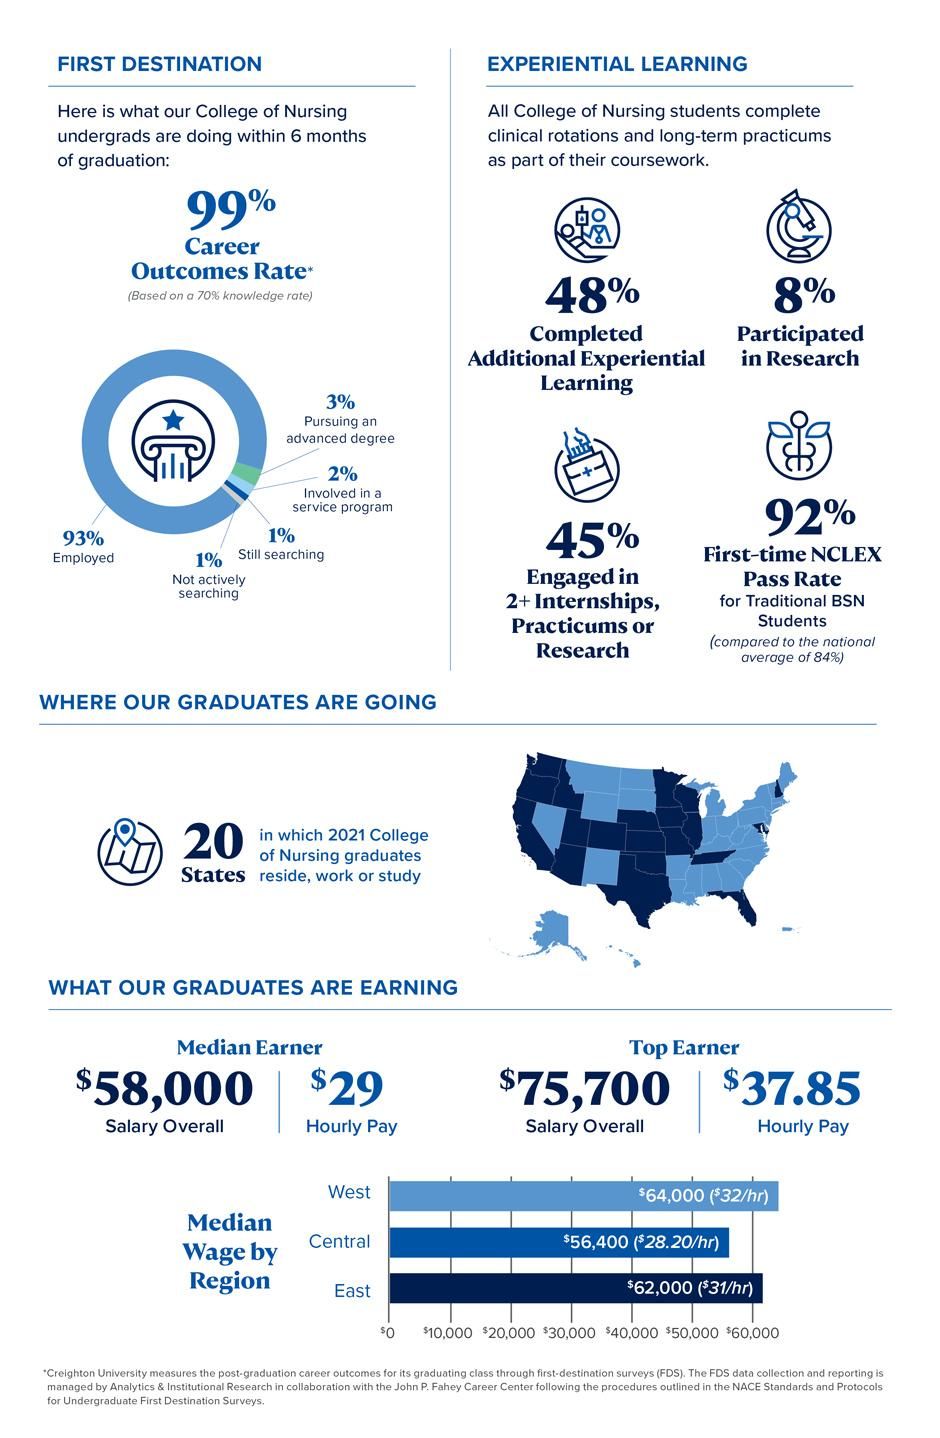 Nursing Outcomes 99% Career Outcomes Rate / Experiential Learning Engagement / 20 State where 2021 graduates reside, work or study / $58,000 Median Earner overall salary